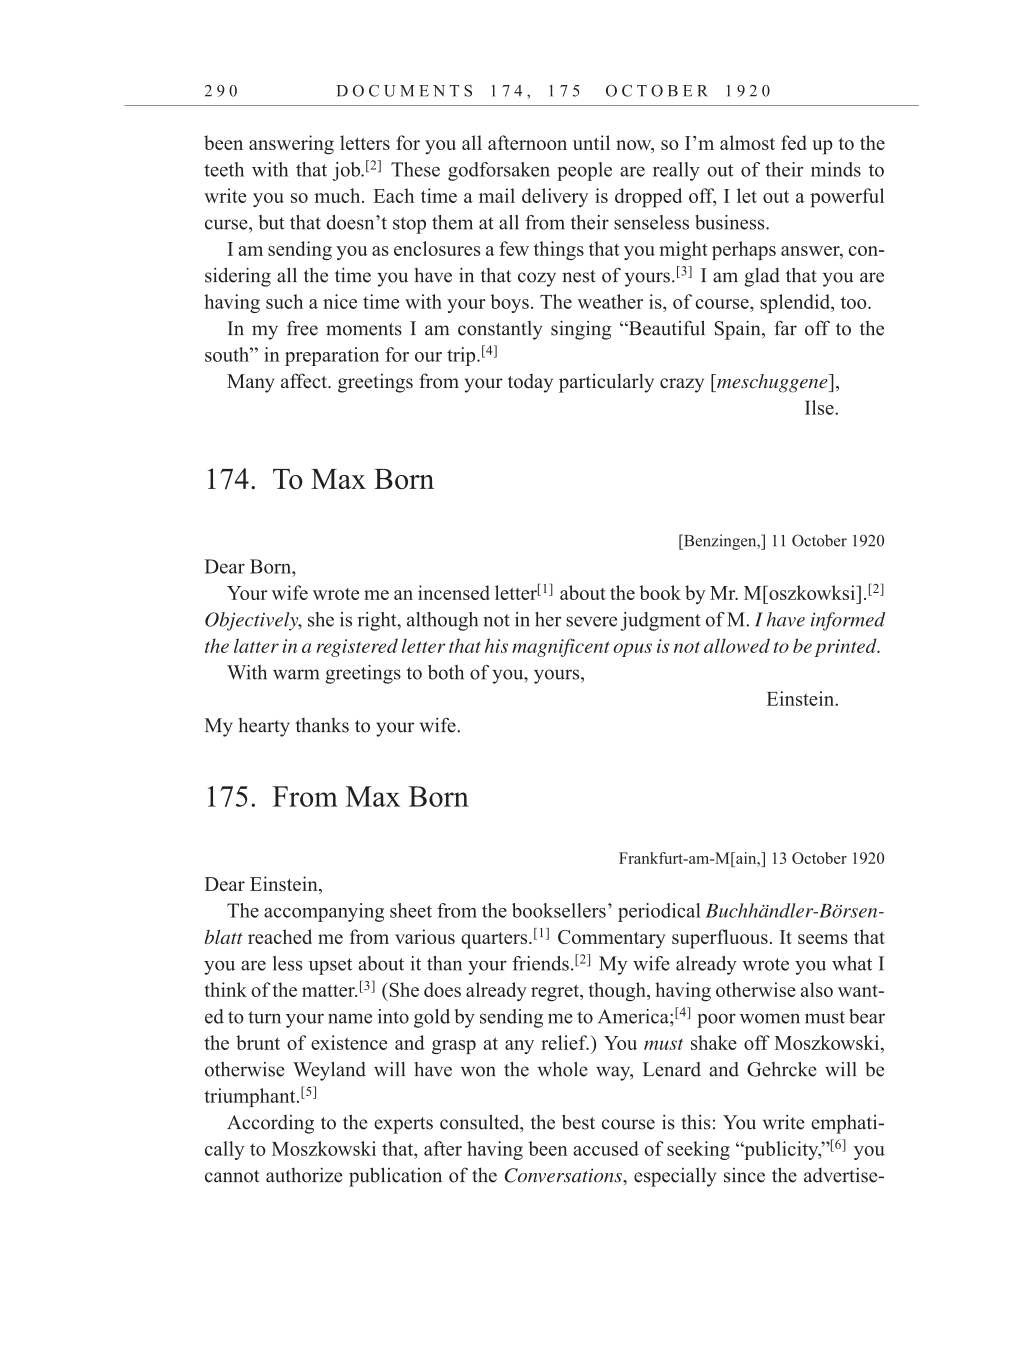 Volume 10: The Berlin Years: Correspondence, May-December 1920, and Supplementary Correspondence, 1909-1920 (English translation supplement) page 290